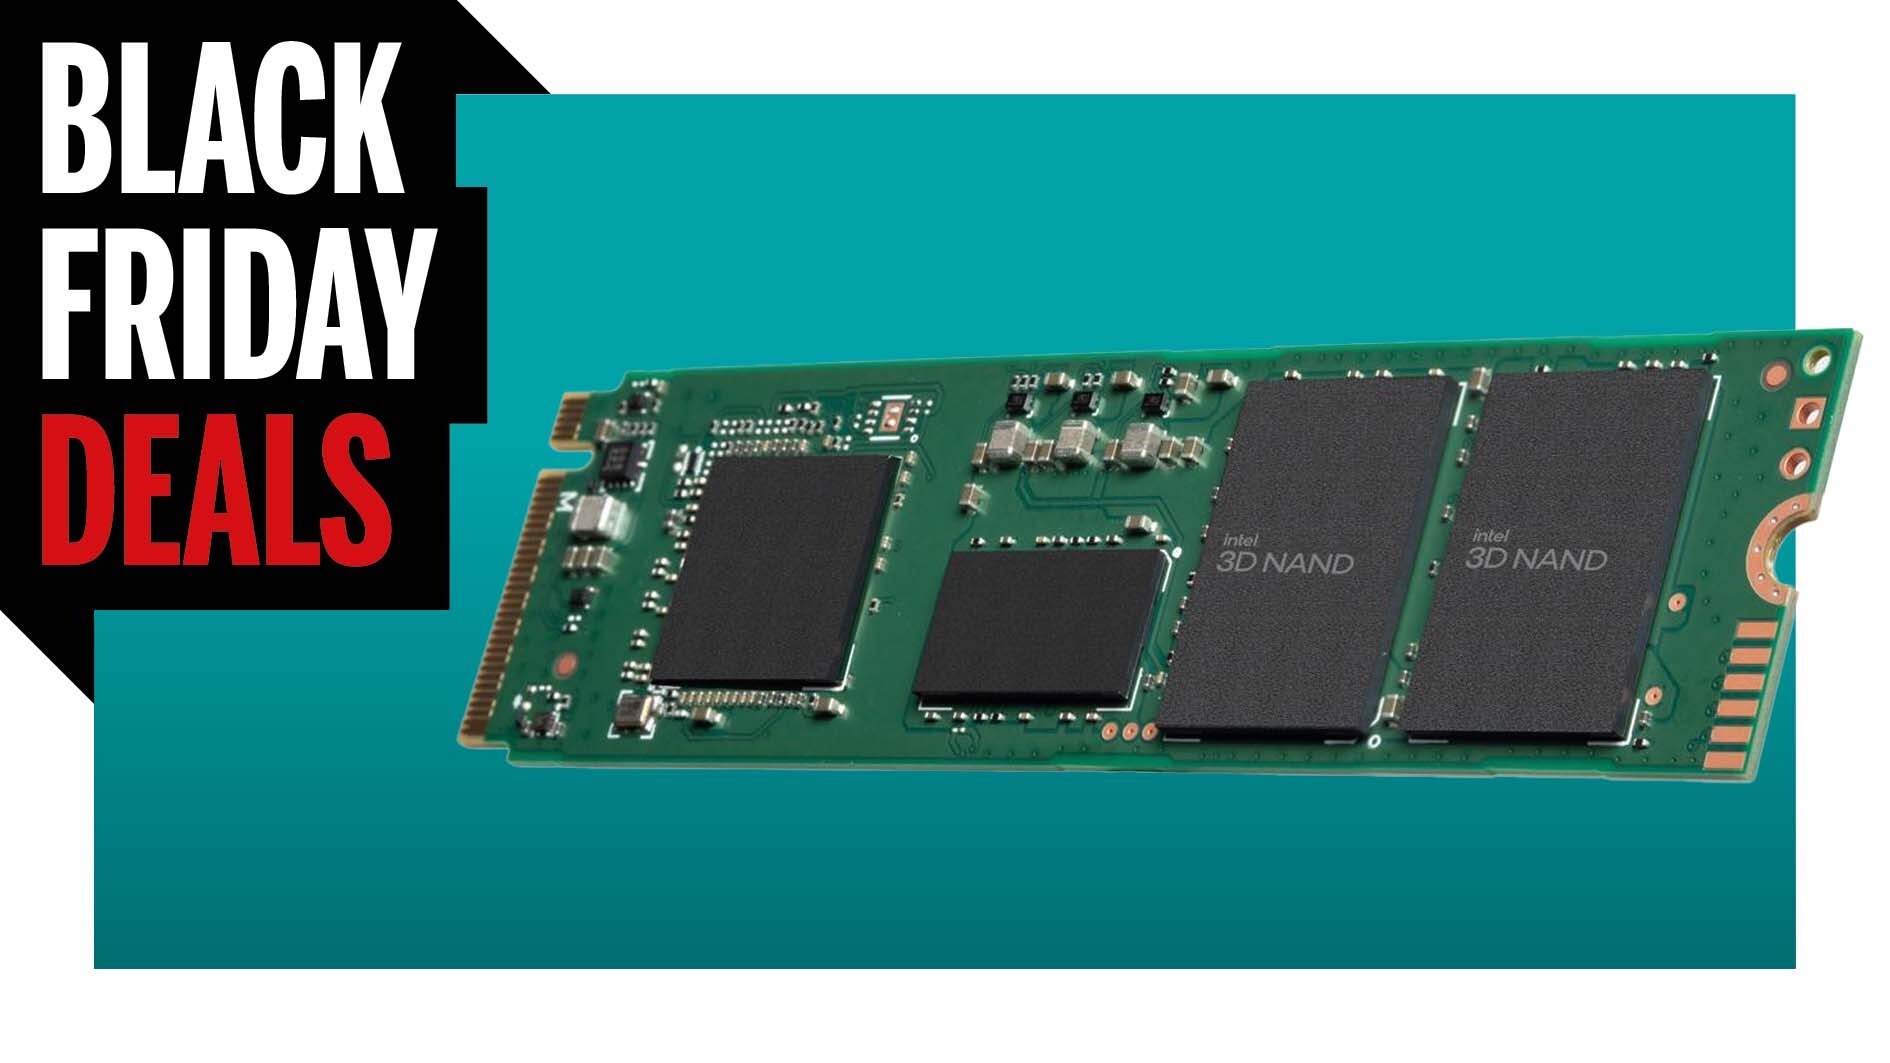  Get 1TB of fast NVMe storage for under $100 with this dirt-cheap Black Friday SSD deal 